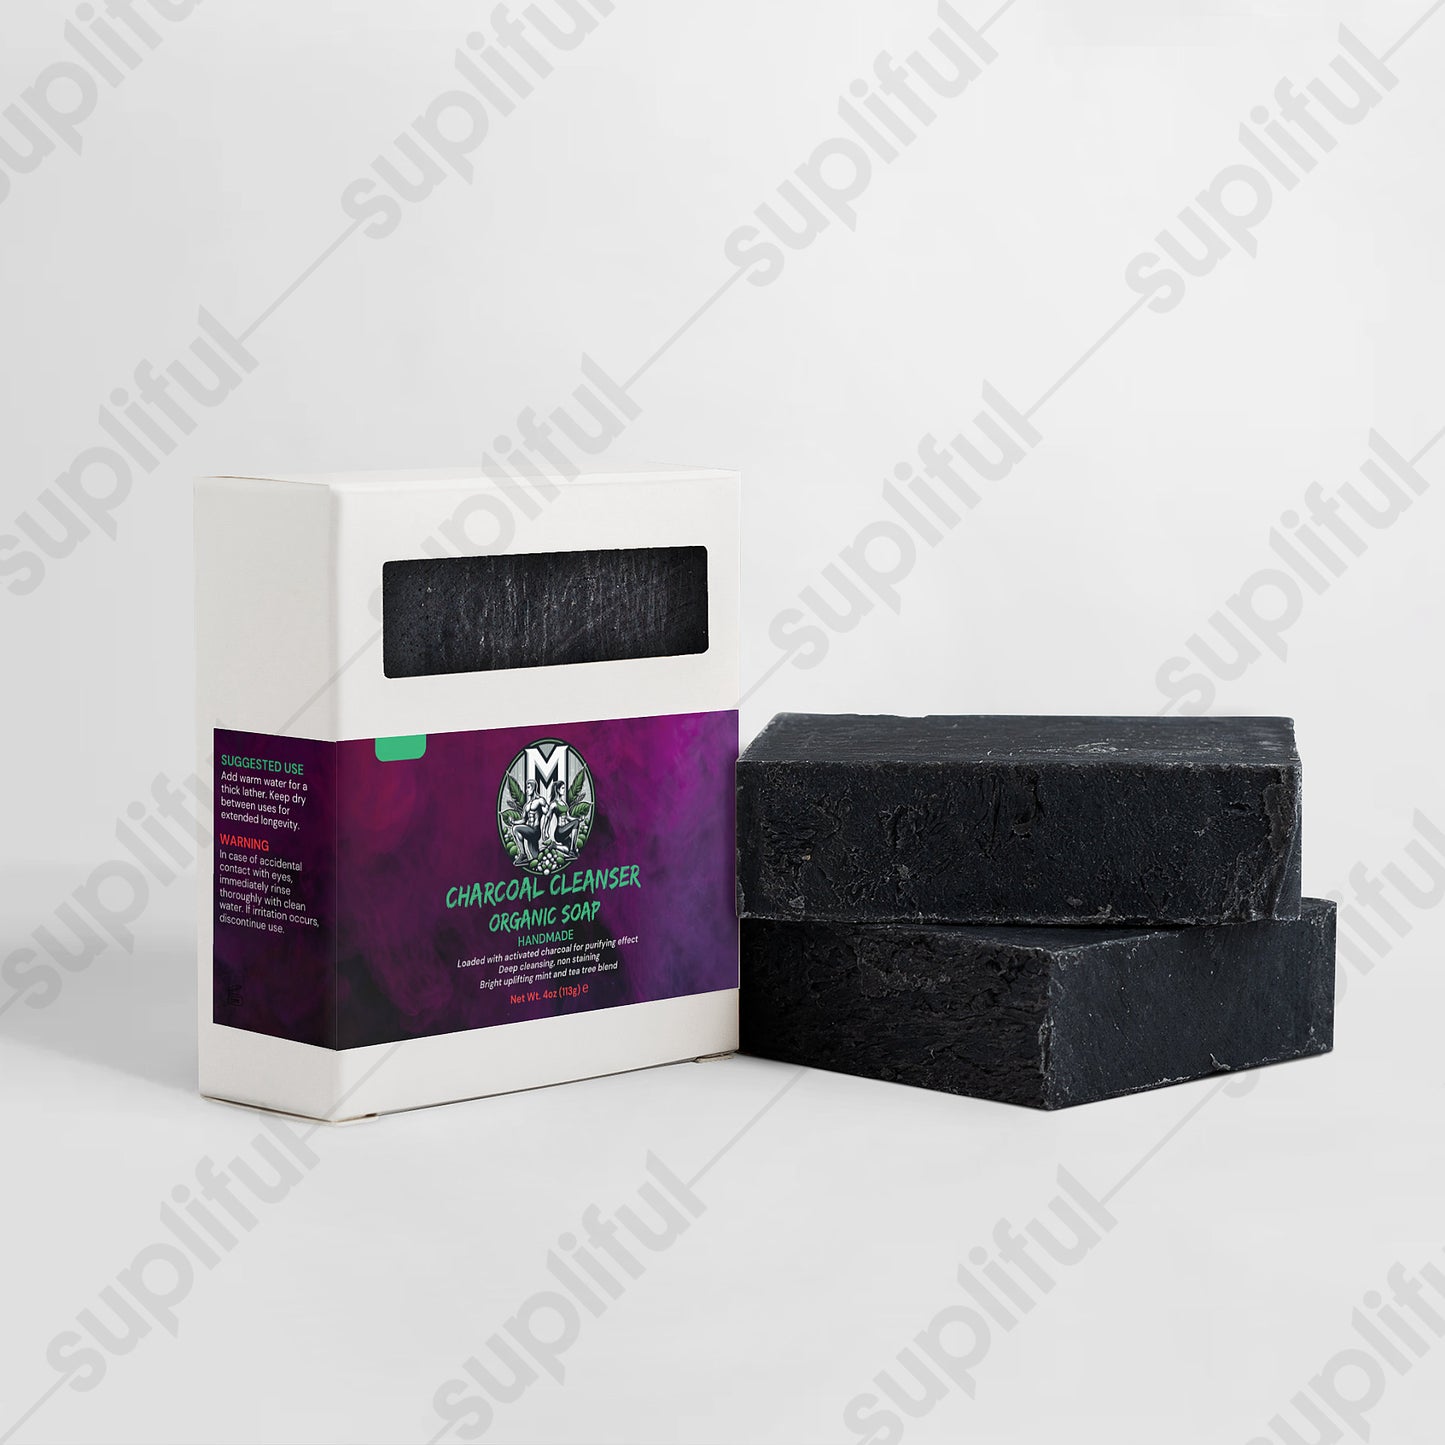 Vibrant Visions - Organic Health & Wellness - Charcoal Cleanser - Organic Carbon Soap